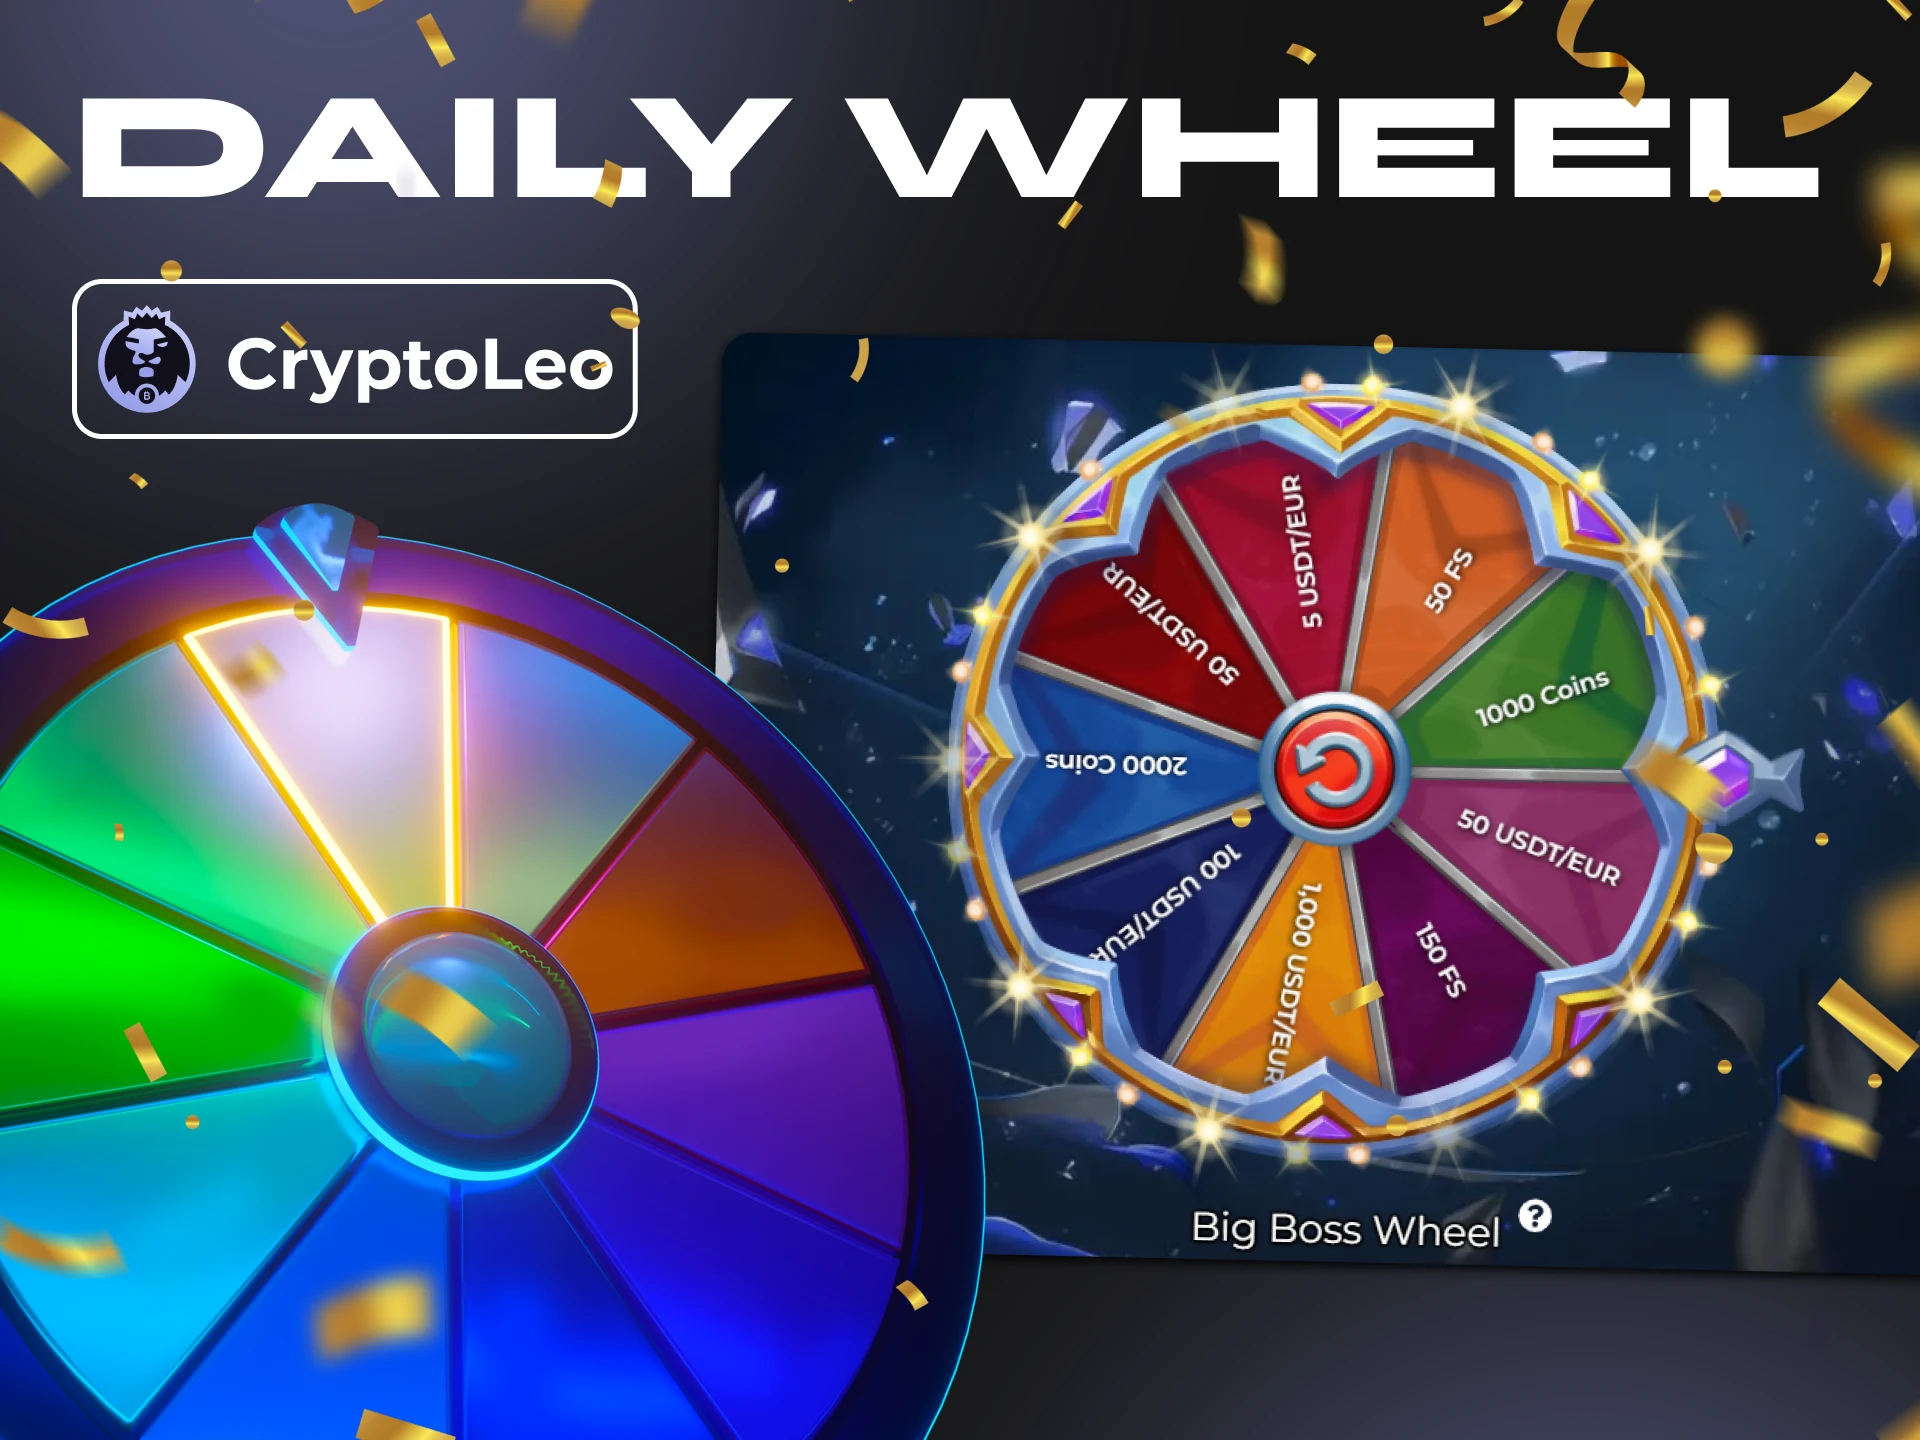 Spin the Cryptoleo wheel and get the biggest wins.